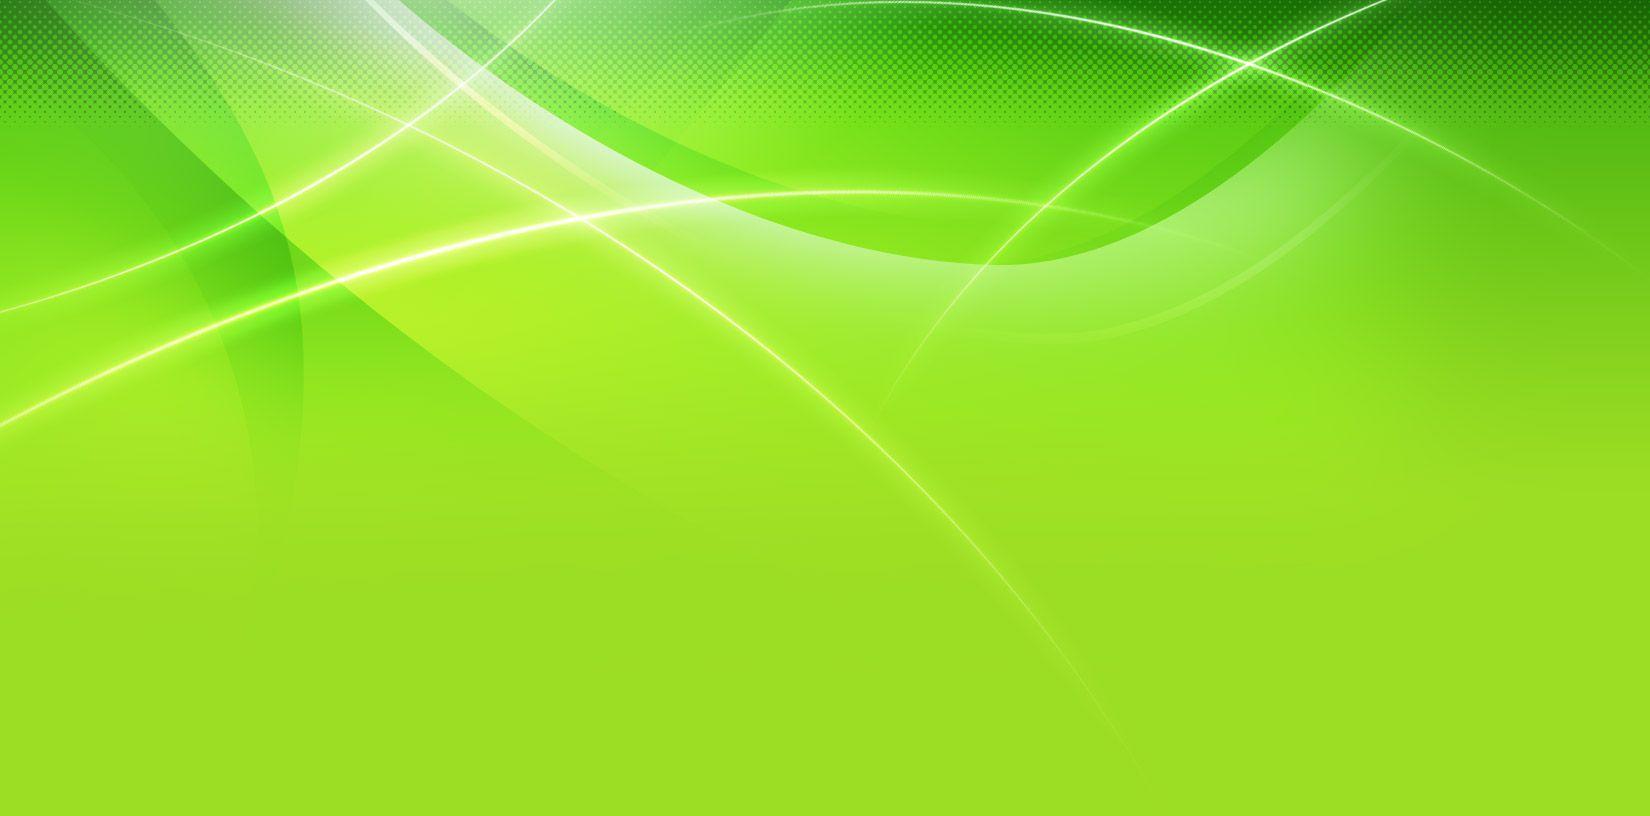 Green Background Image